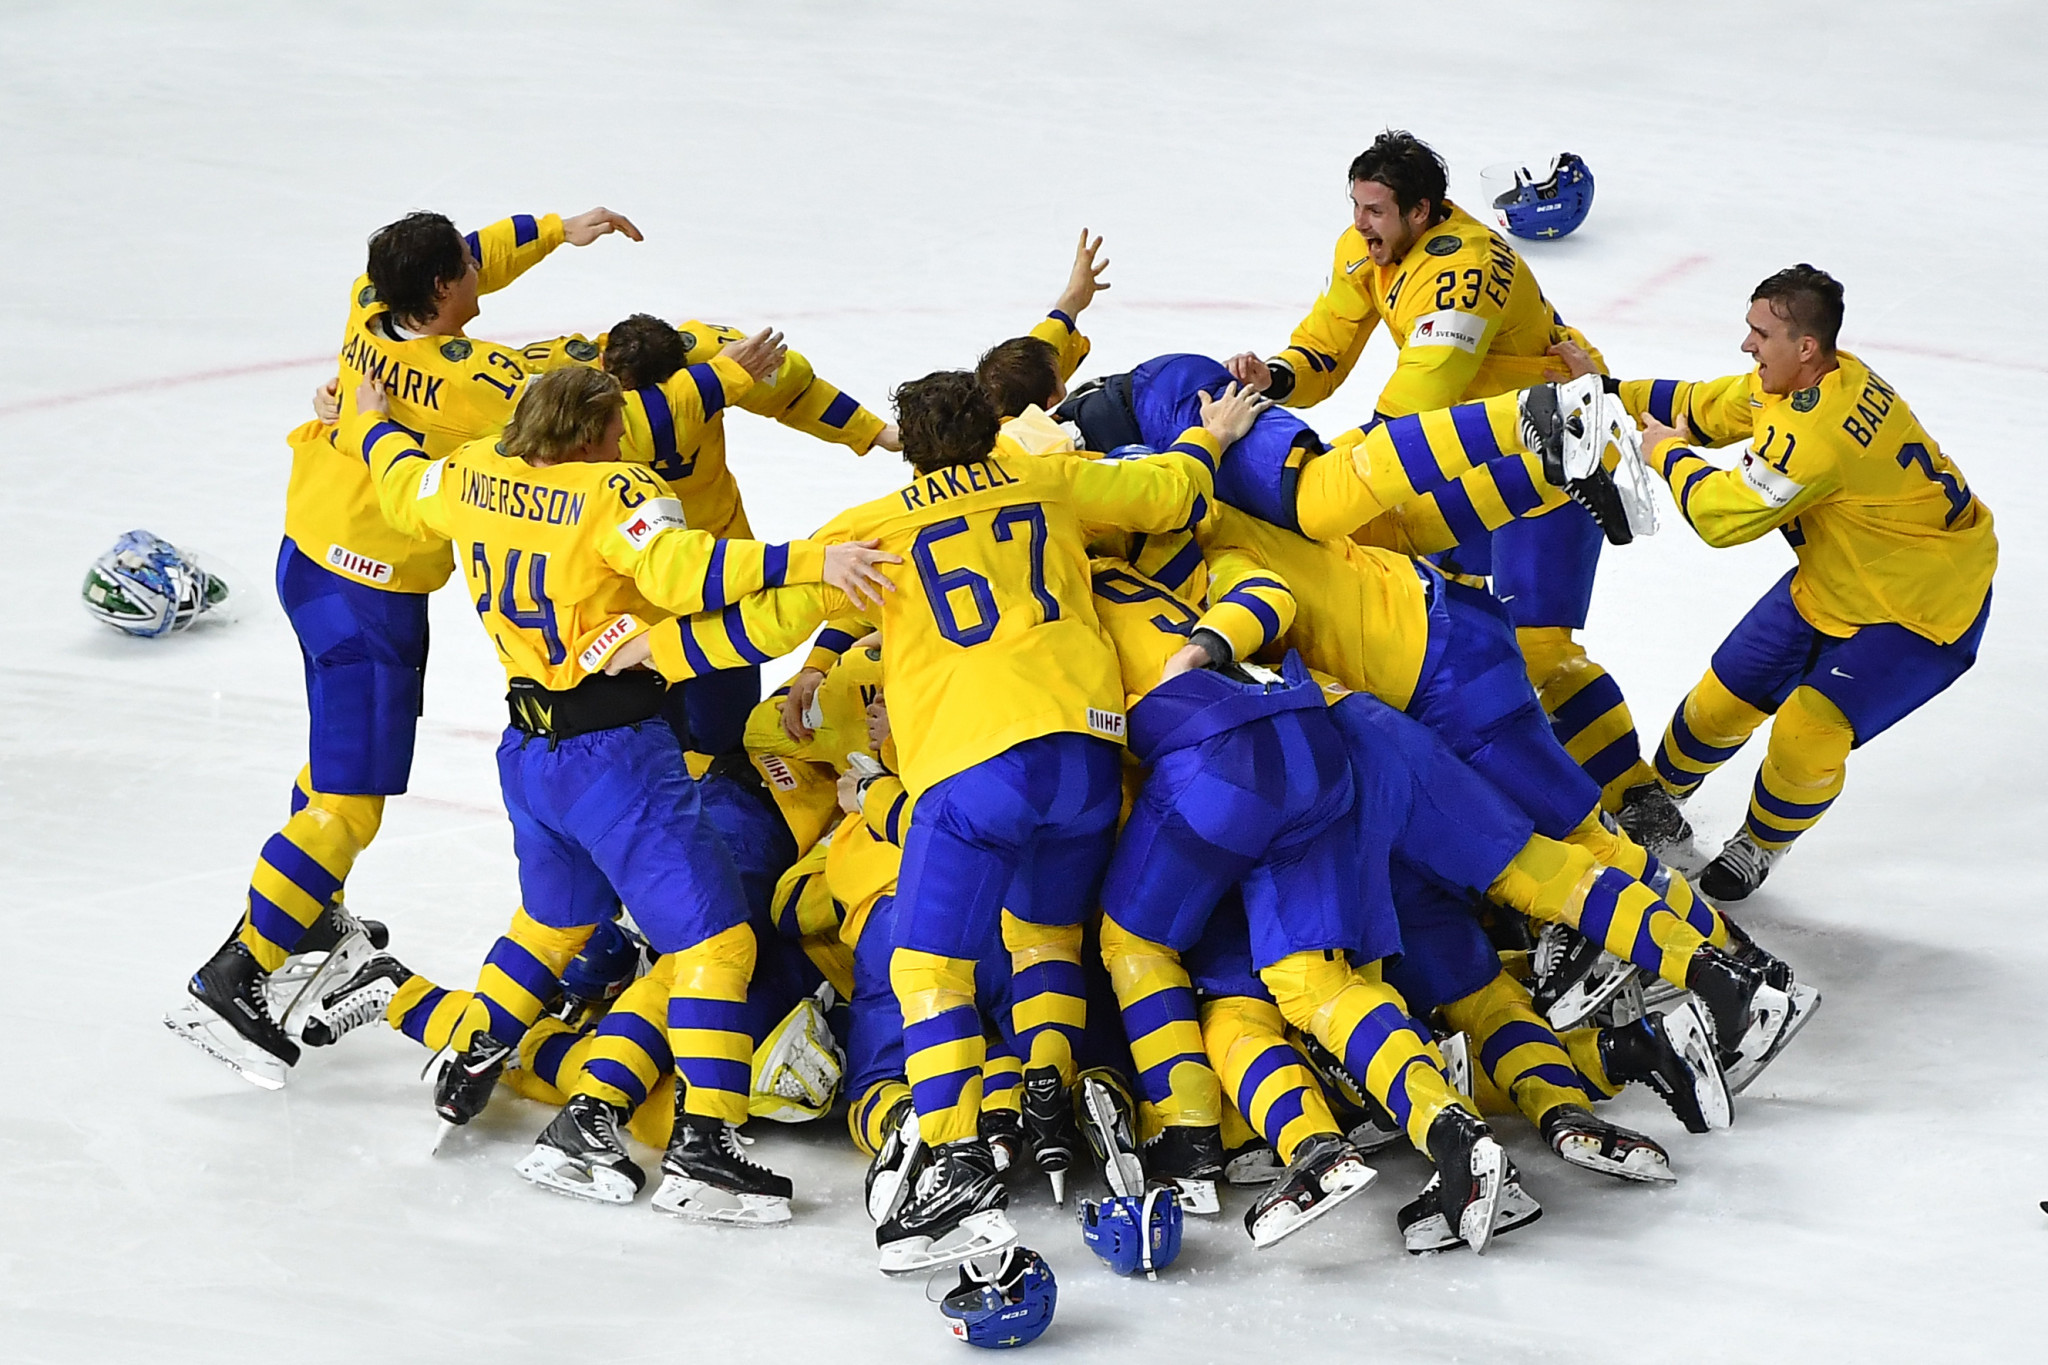 Back-to-back world champions Sweden have moved up to second position ©Getty Images